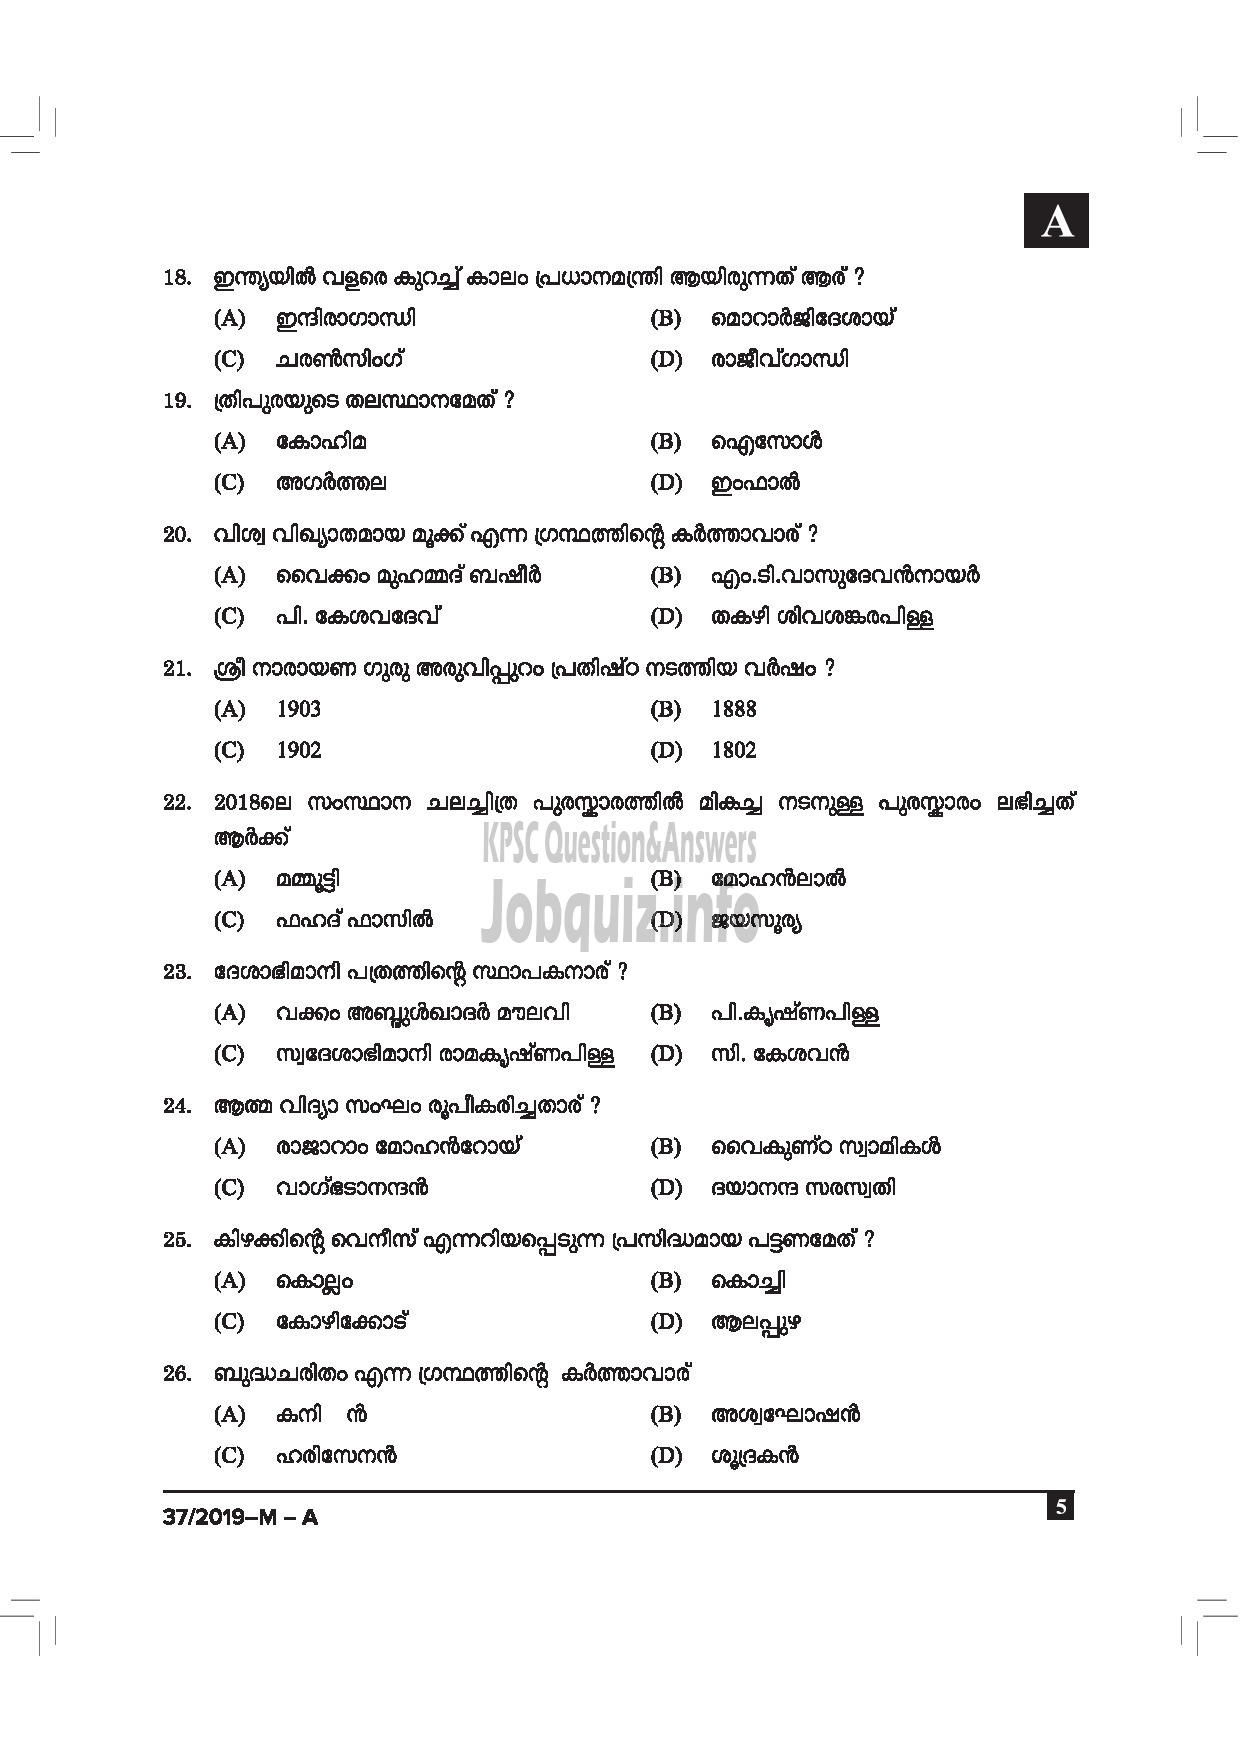 Kerala PSC Question Paper - DRIVER CUM OFFICE ATTENDANT / POLICE CONSTABLE DRIVER GOVT OWNED COMP / CORP / BOARD / POLICE MALAYALAM -5